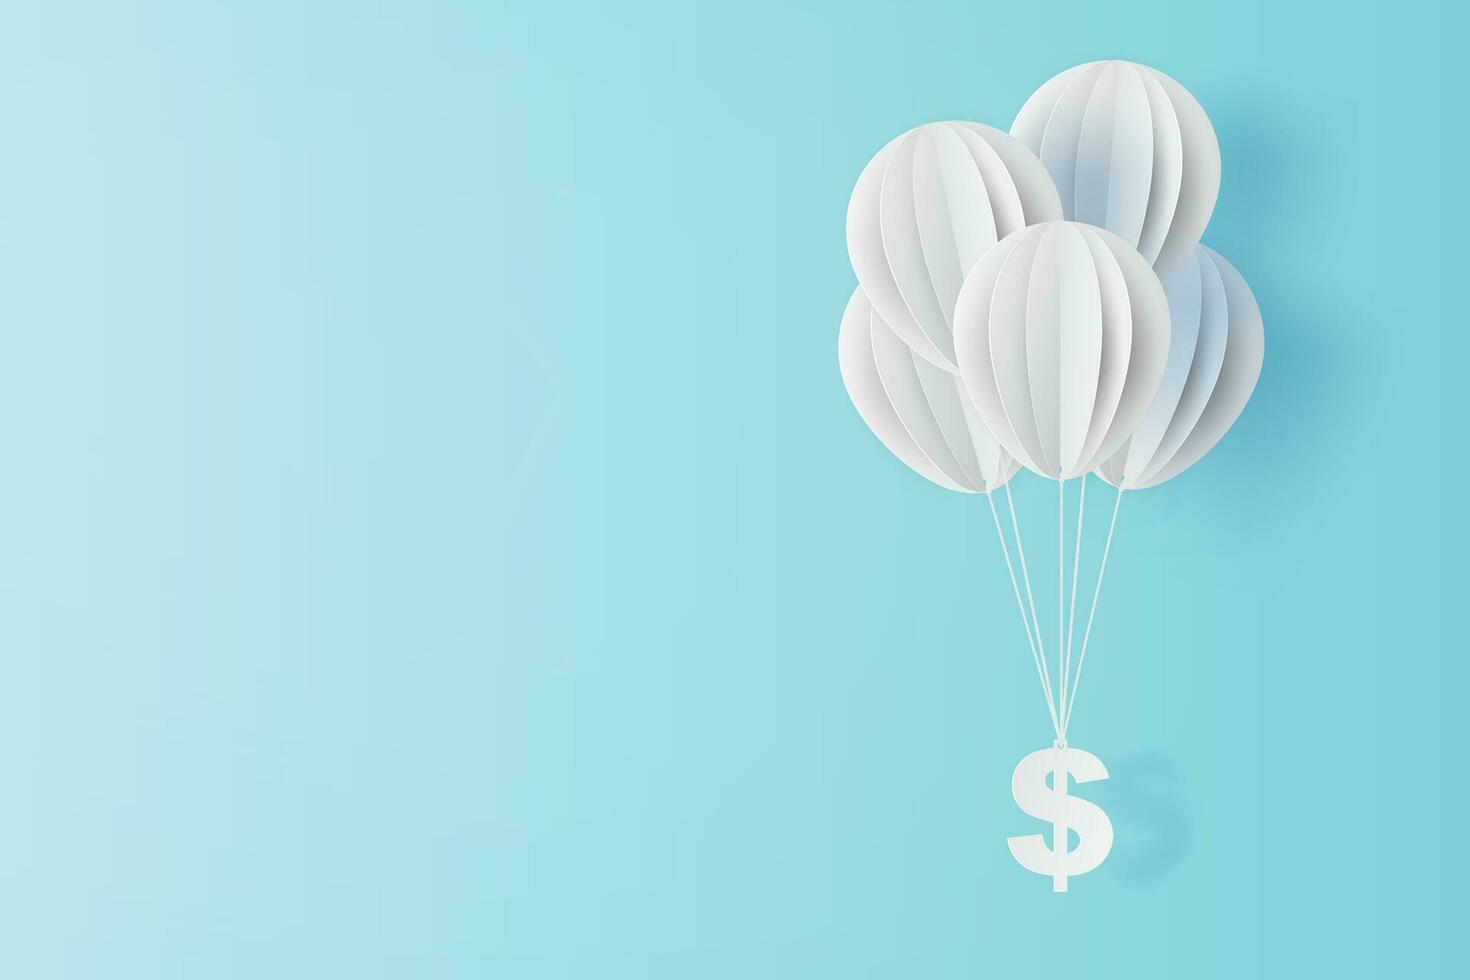 illustration of balloon fly with dollar sign on blue sky. Business and management concept idea.Creative design paper cut and craft style scene for your text.By pastel color.Financial exchange.vector vector